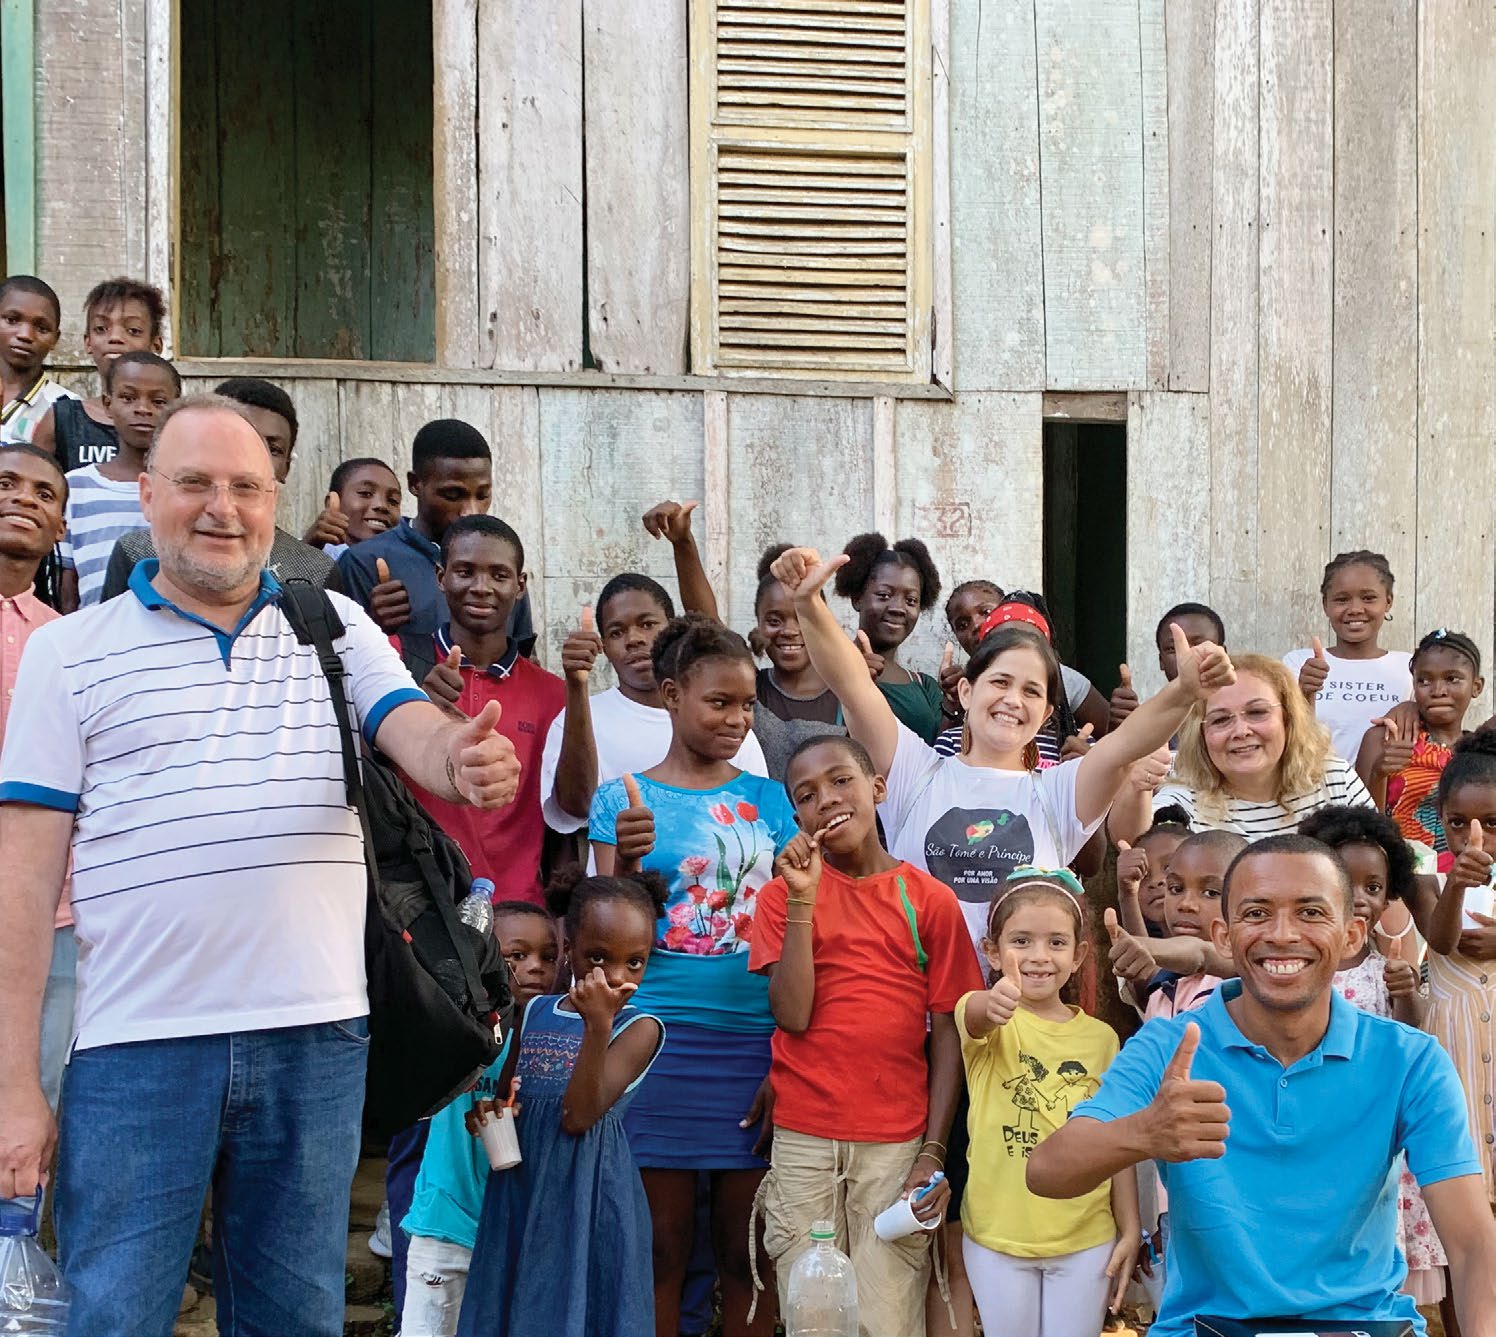 Sharing God’s Love from Europe to Africa